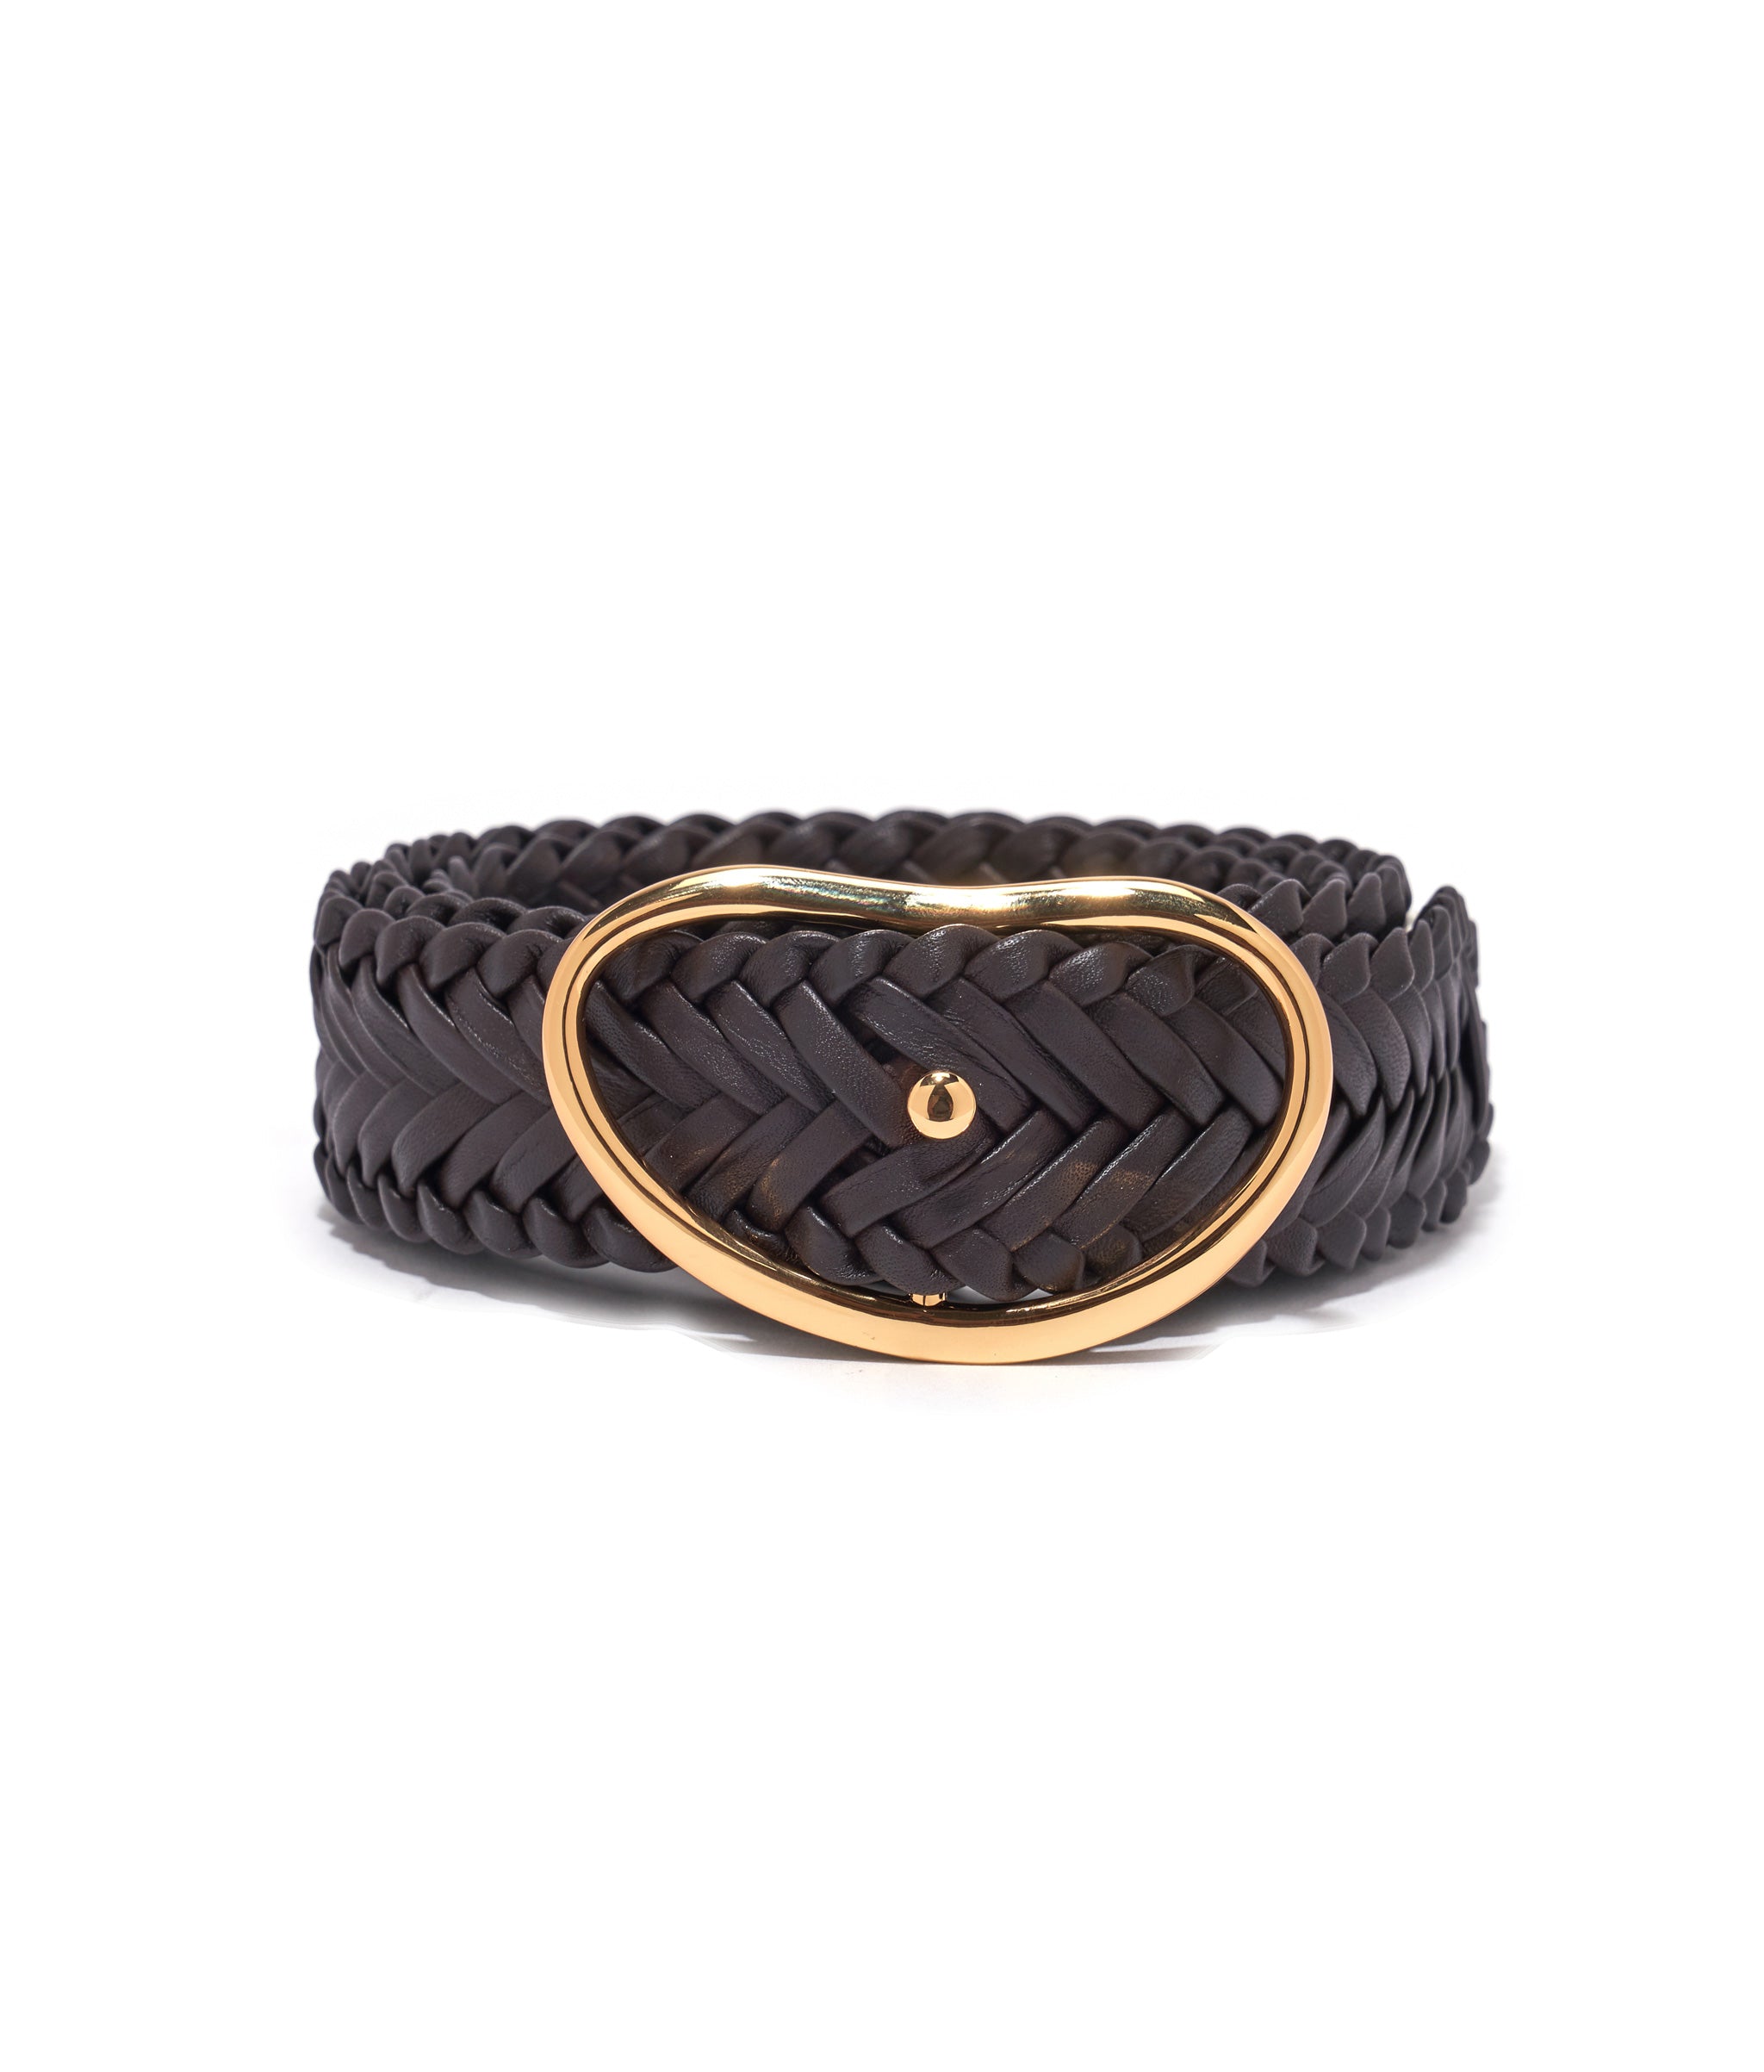 Wide Georgia Belt in Woven Java. Woven dark brown leather belt with gold-plated kidney-shape buckle.